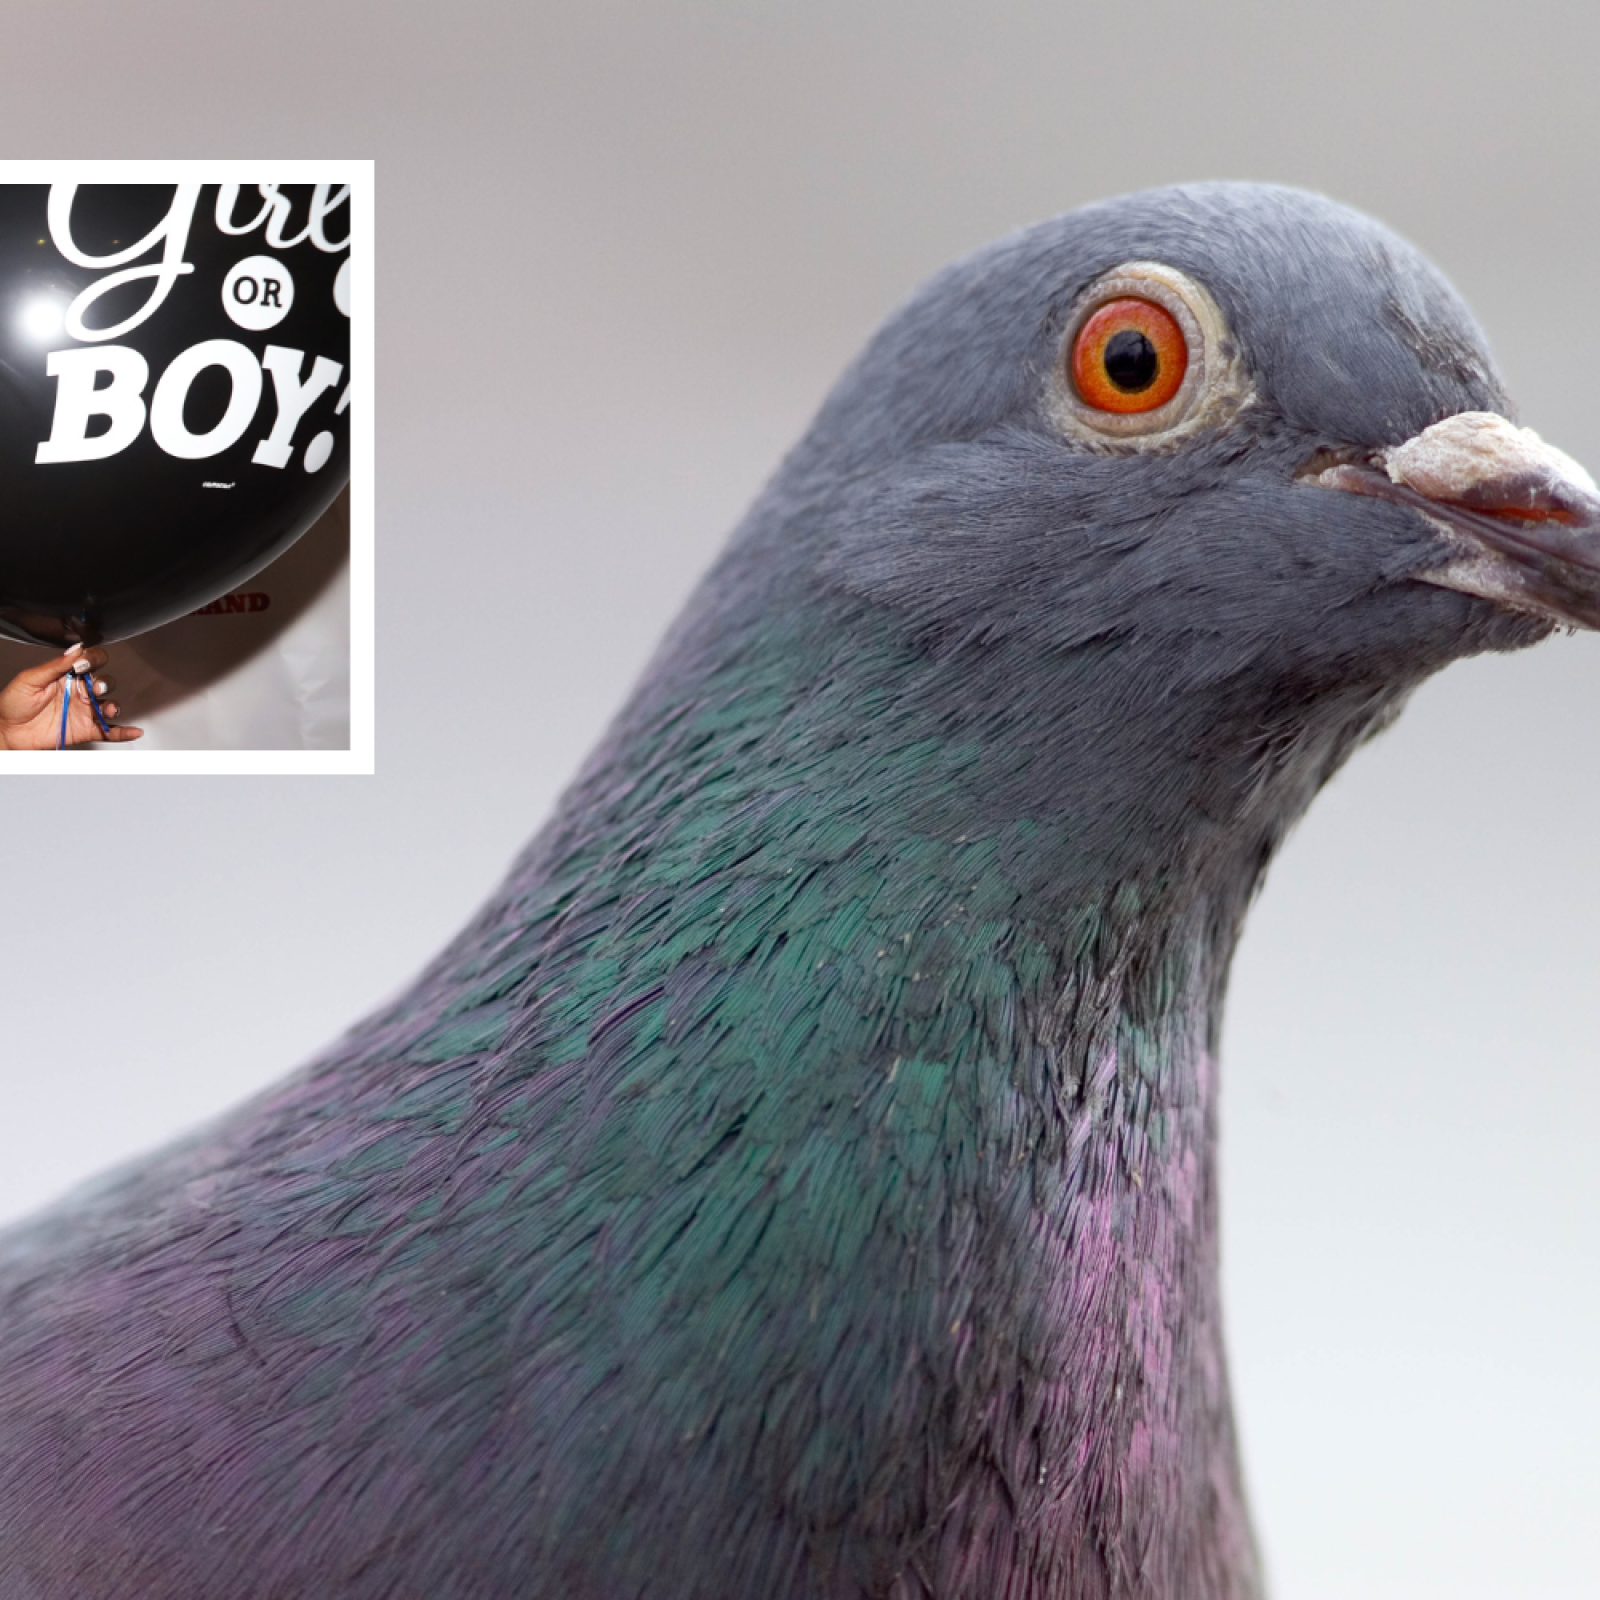 Pink pigeon possibly dyed for gender reveal party in NYC dies - National